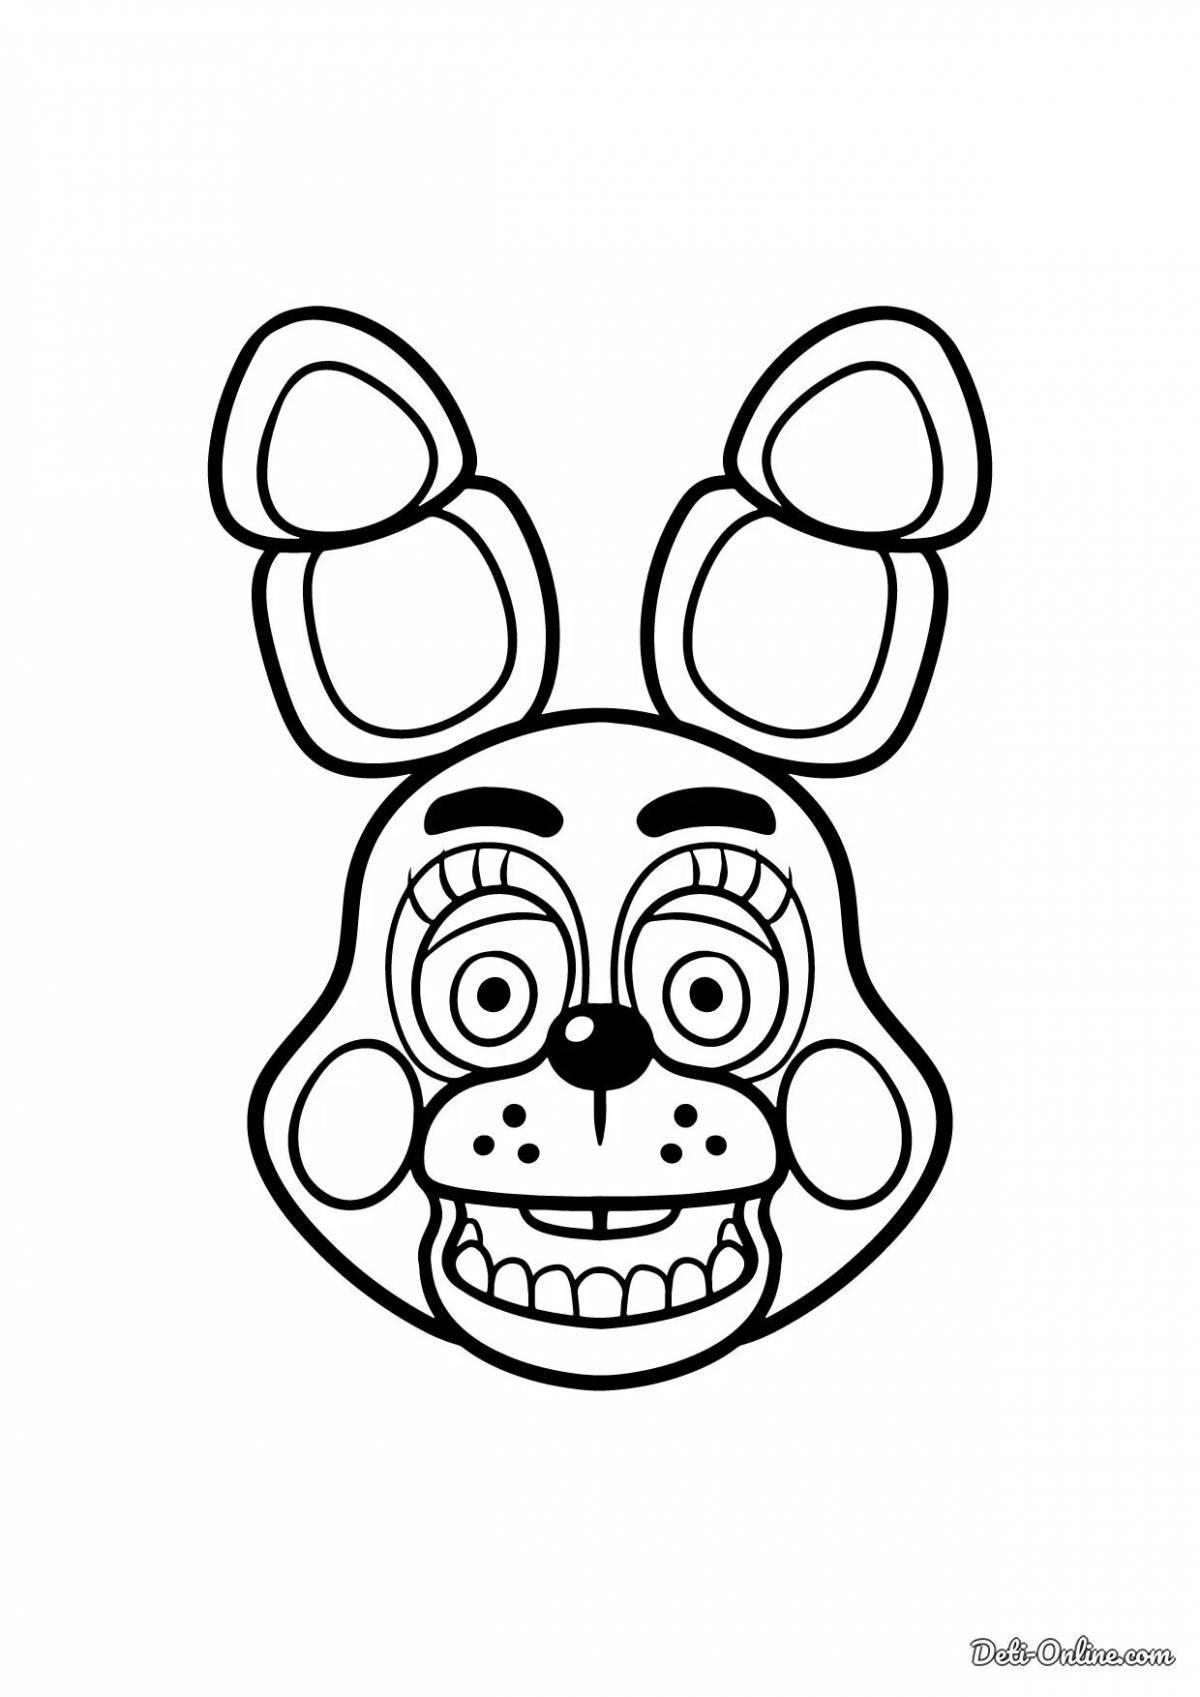 Colorful fnaf head coloring page